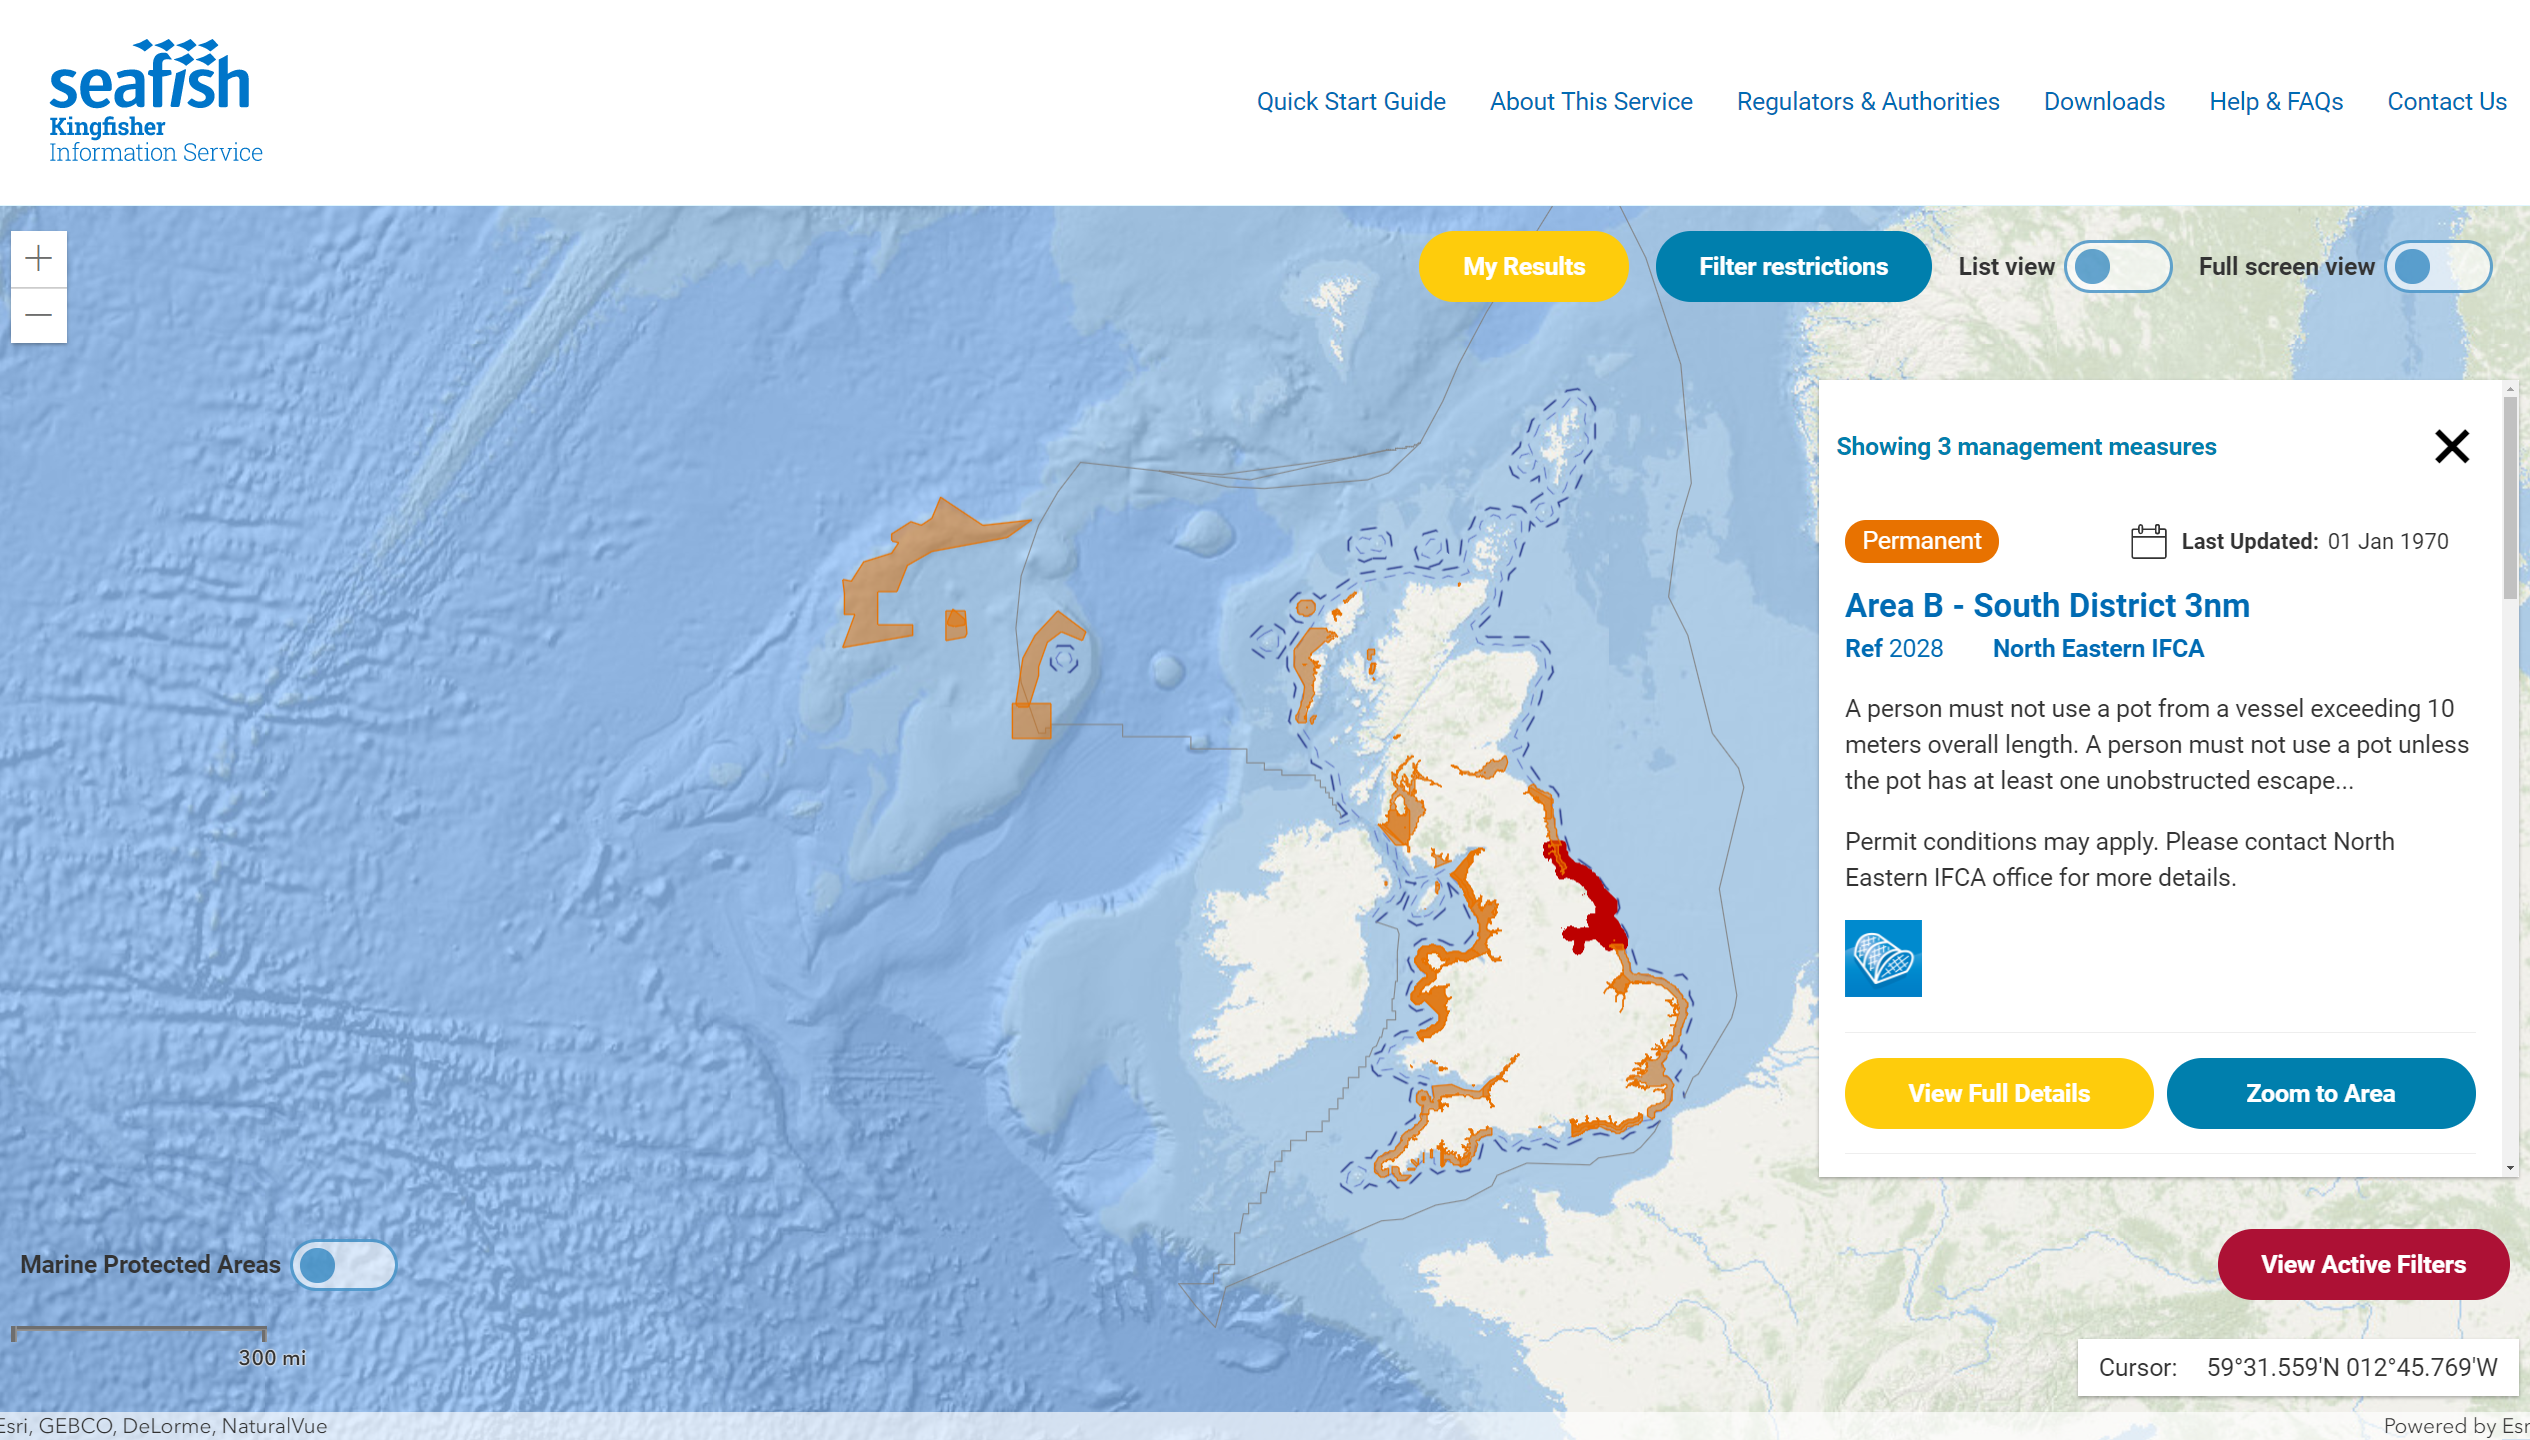 A screenshot of the website with a map of the UK and colour blocks showing different marine areas